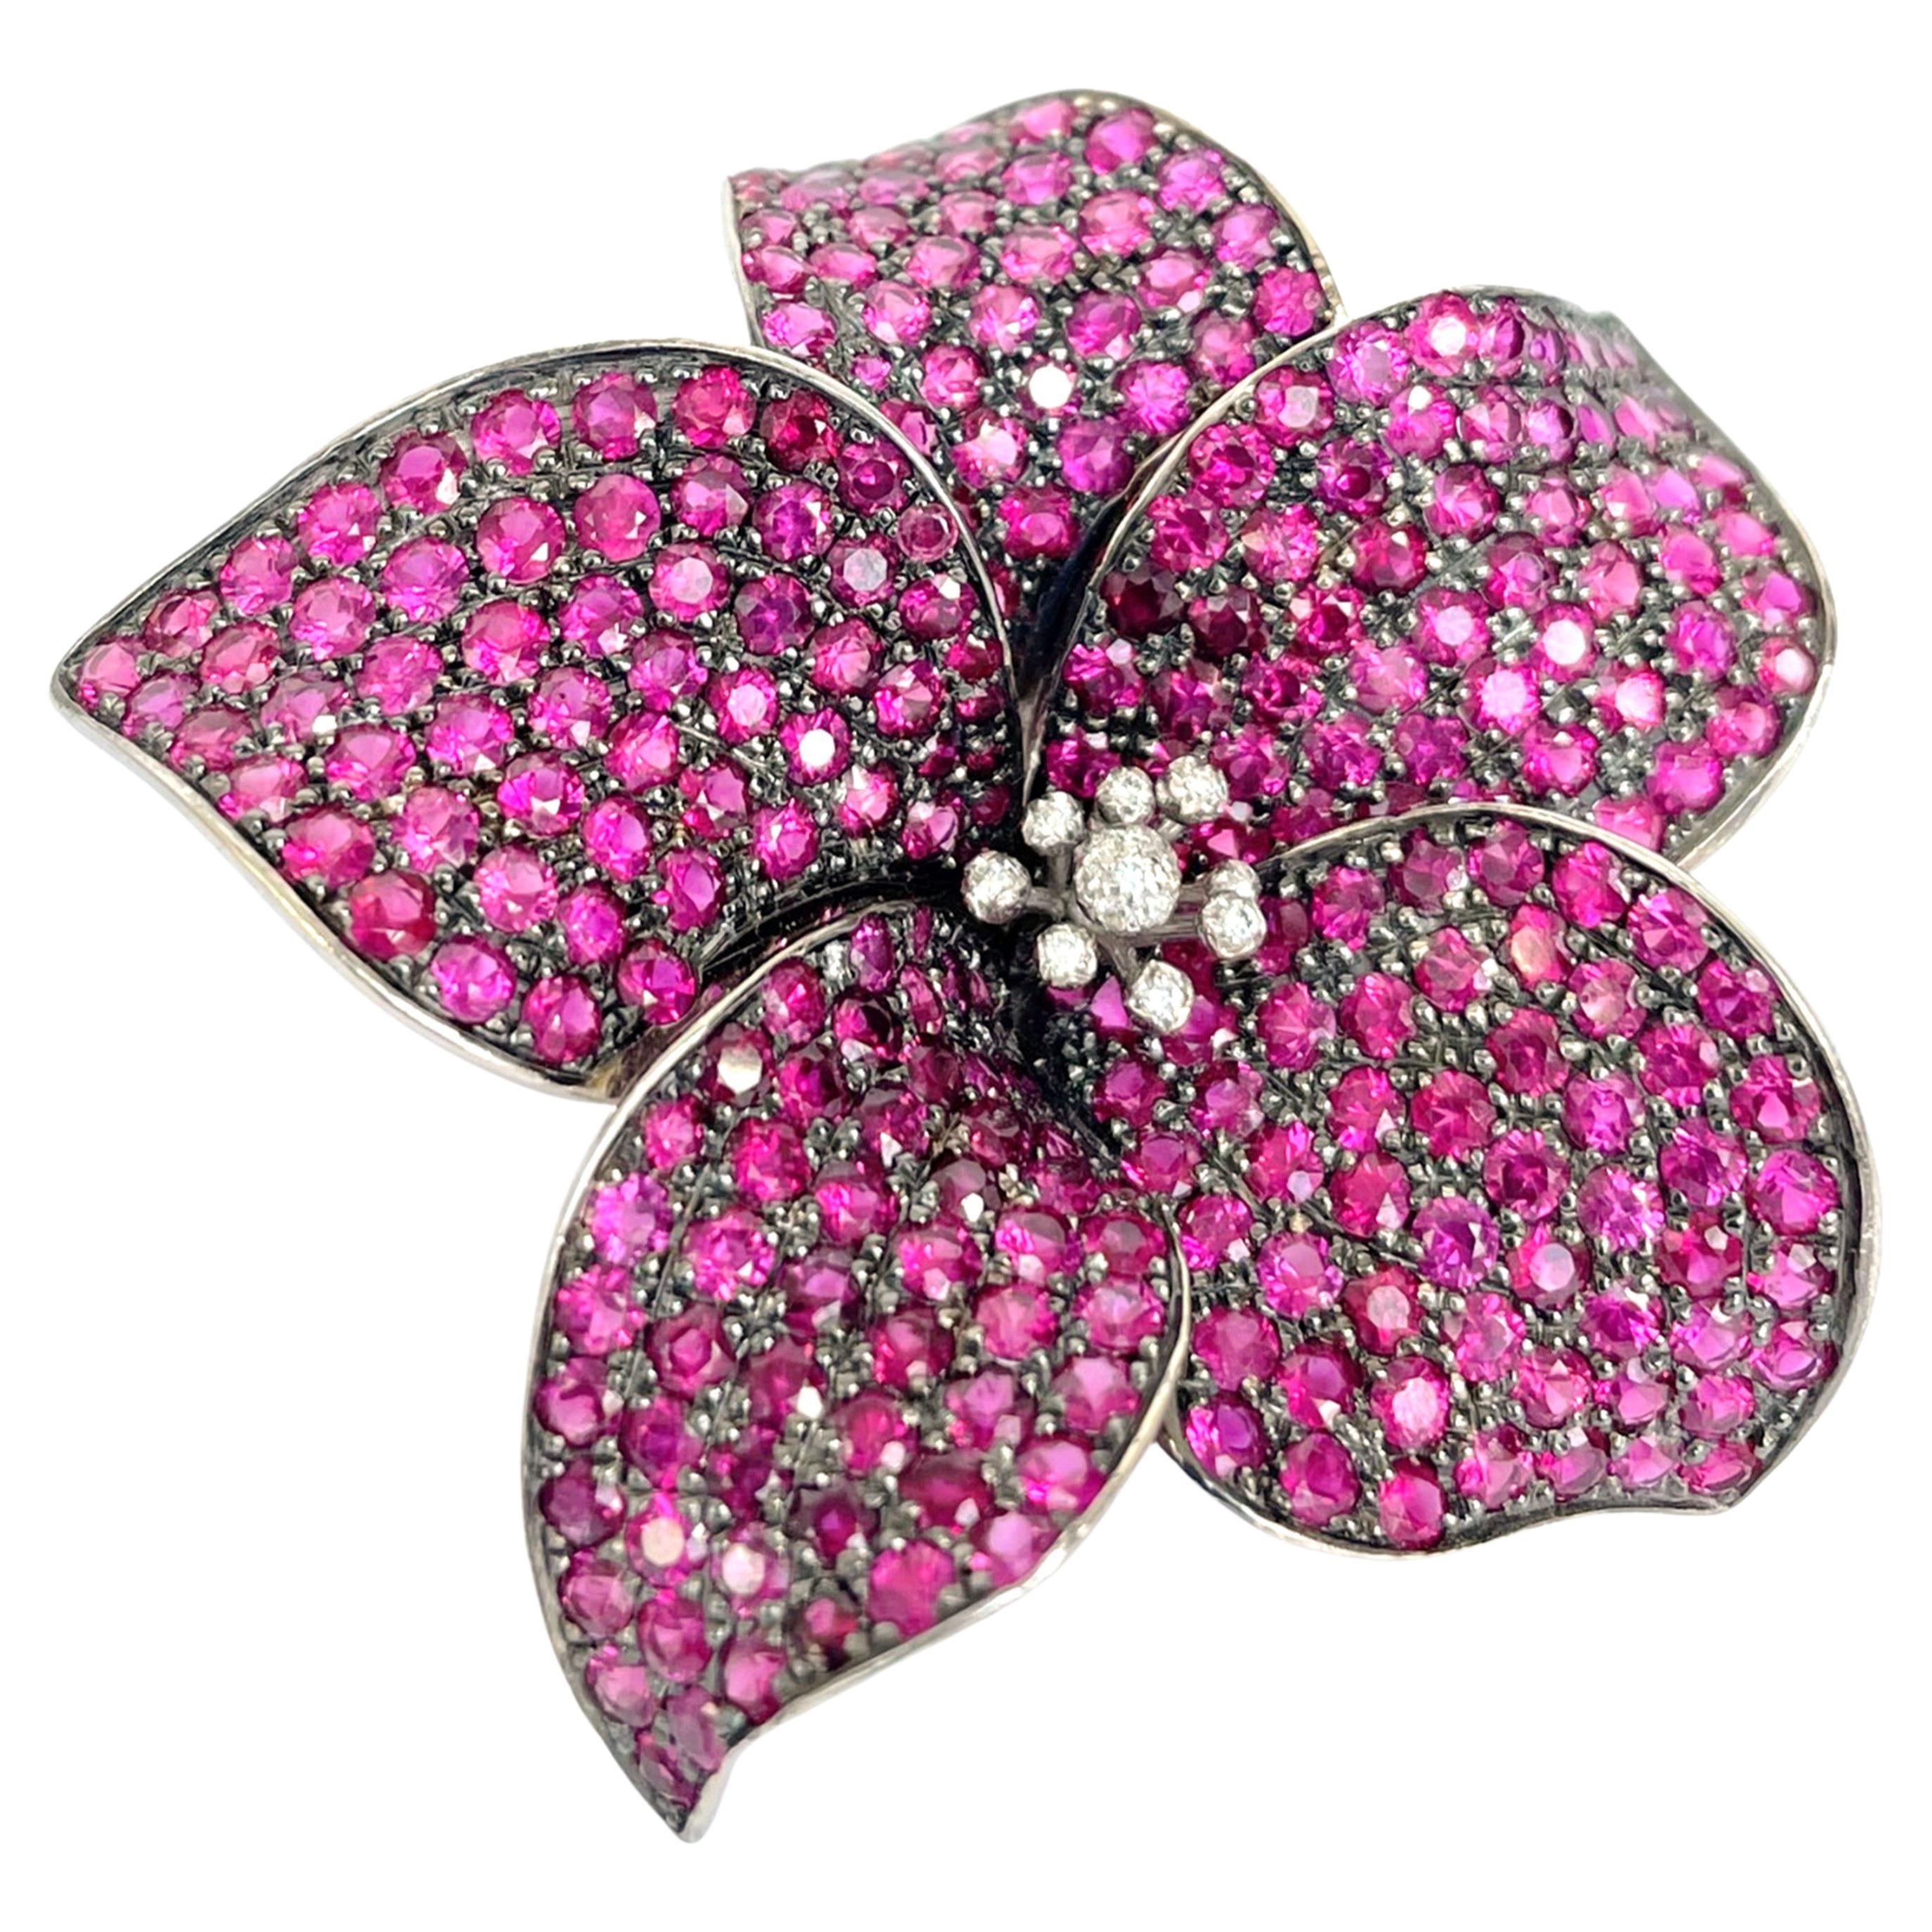 Rosior one-off Ruby and Diamond "Flower" Brooch set in White Gold